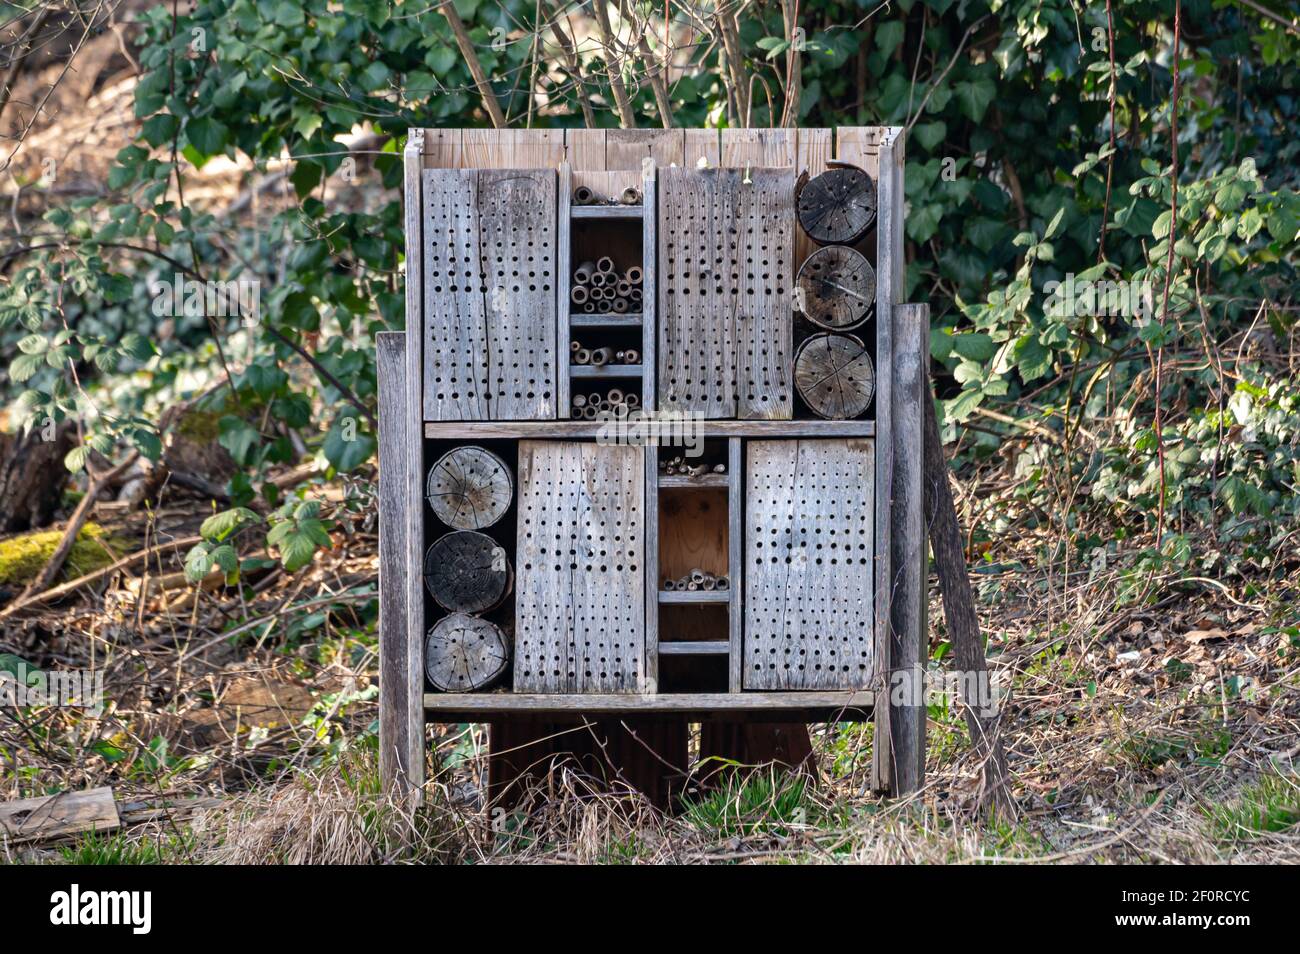 Insect house in the garden. Insect hotel surrounded by plants. Bug hotel in Switzerland. Protection pollinators. Stock Photo